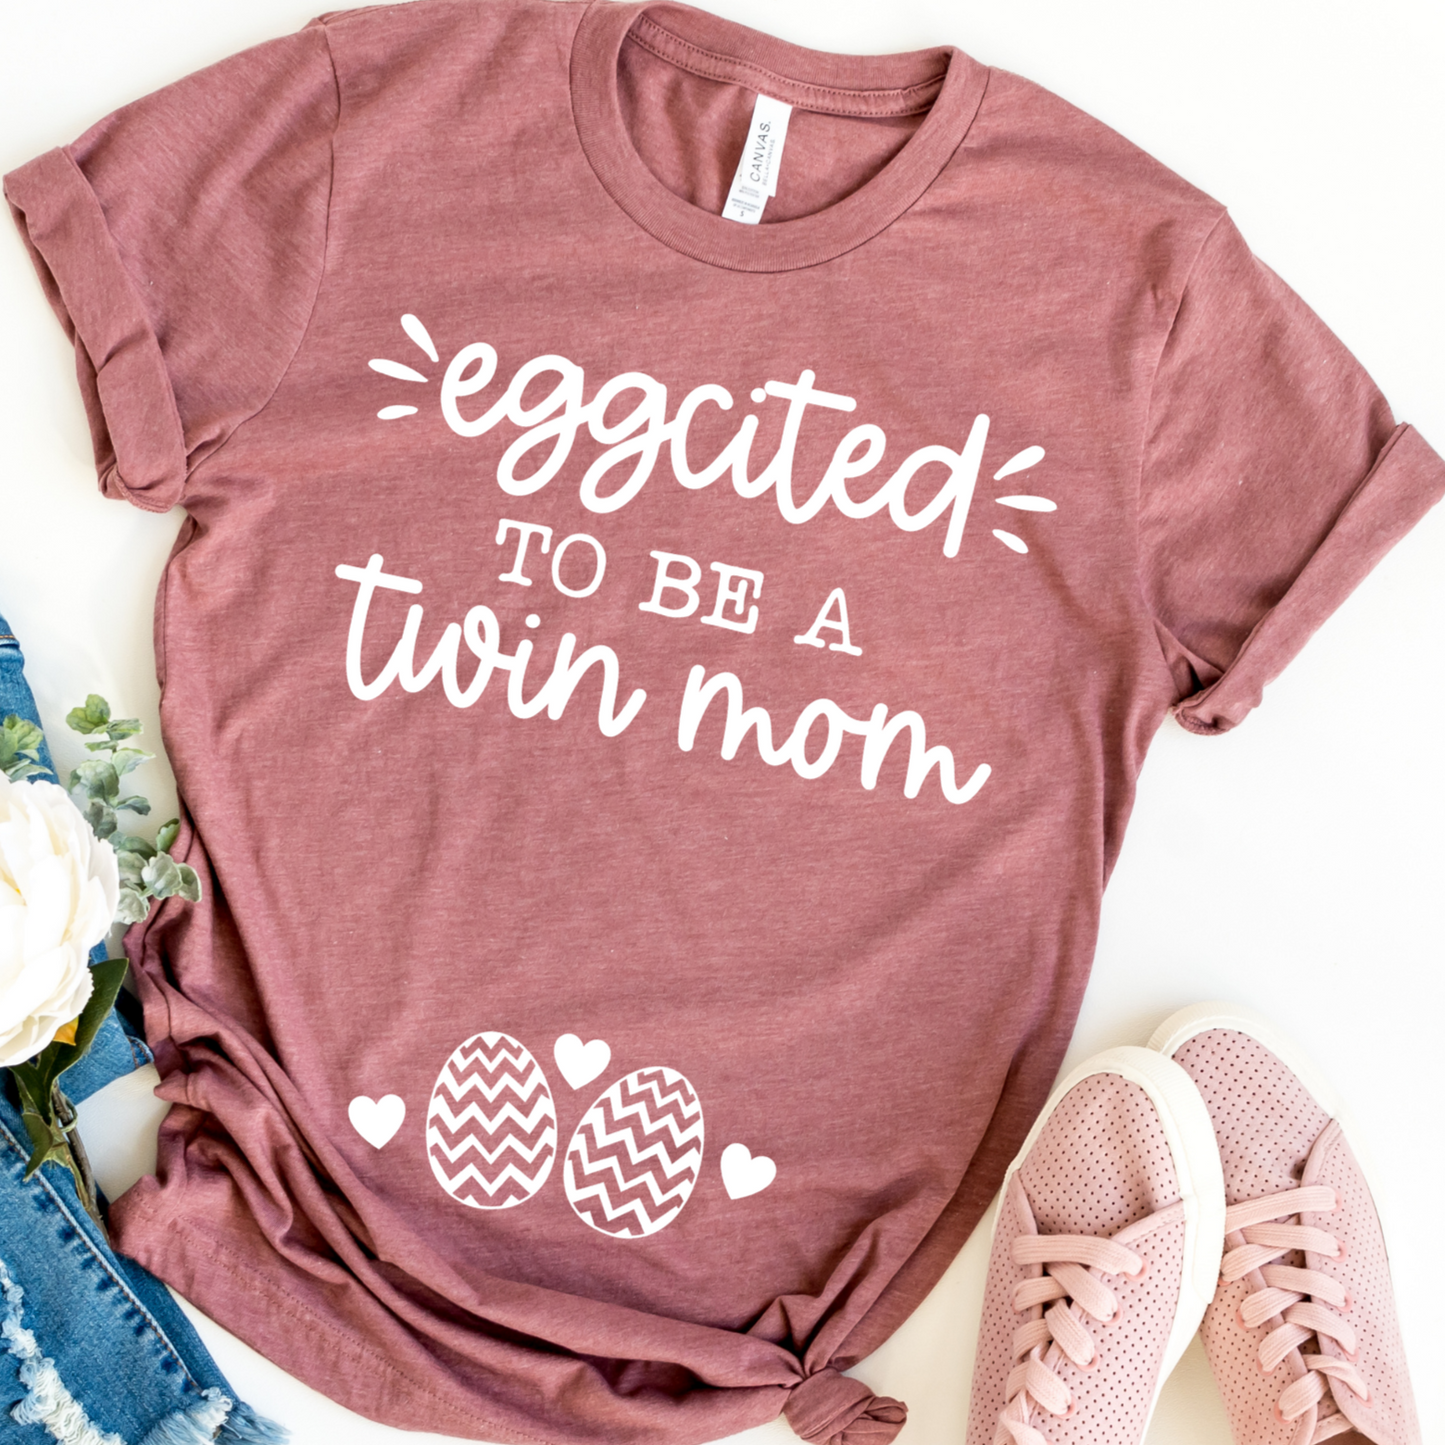 Eggcited to a be a Twin Mom